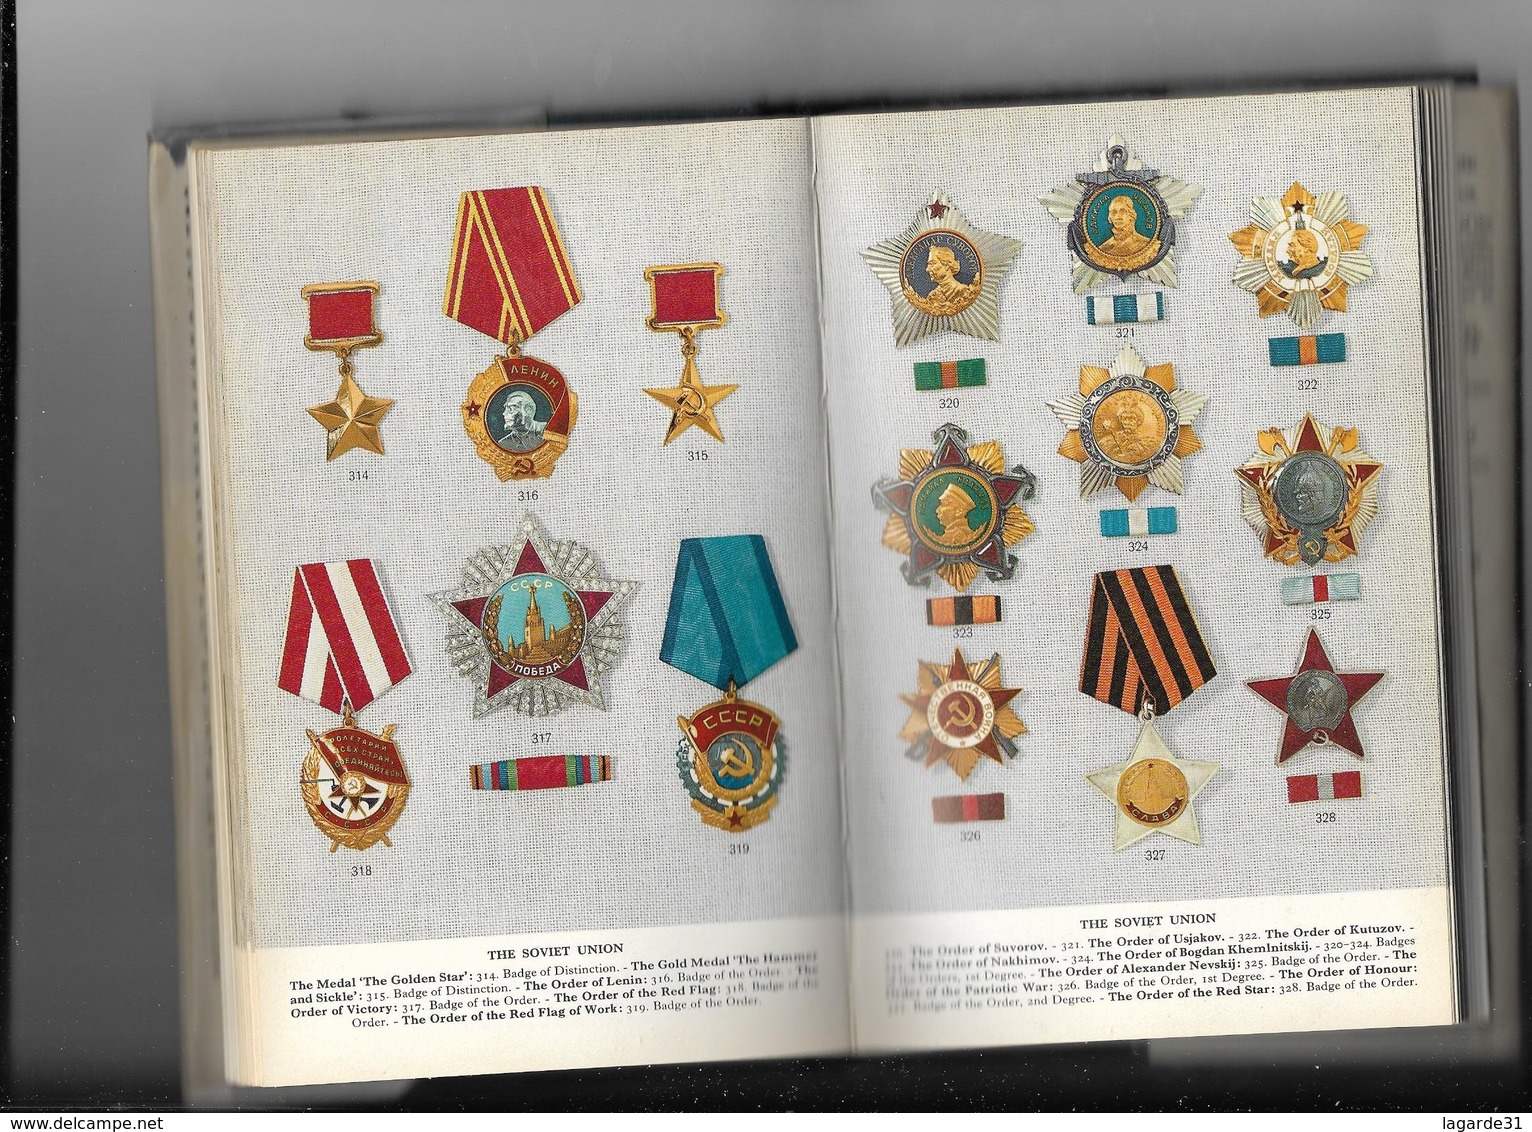 ORDERS MEDALS AND DECORATIONS OF BRITAIN AND EUROPE IN COLOUR - 1967 - Monarchia / Nobiltà